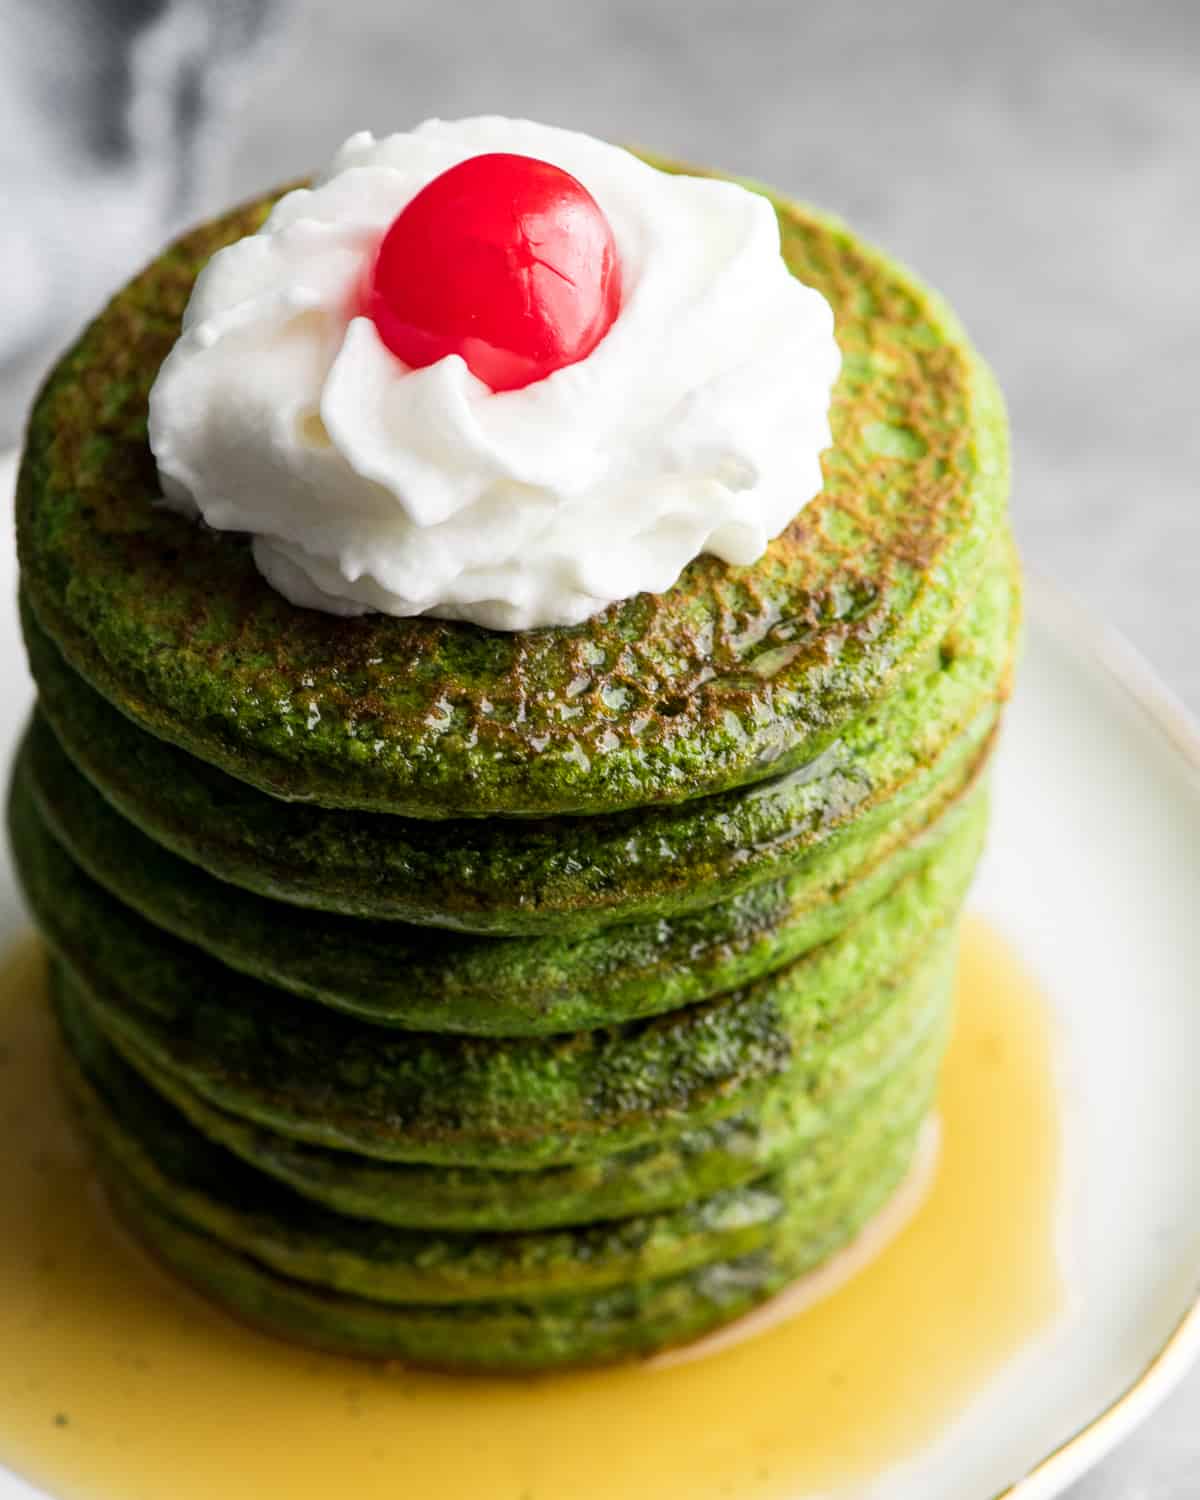 Up-close overhead/angled view of a stack of 7 spinach pancakes topped with whipped cream and a cherry sitting in a pool of syrup